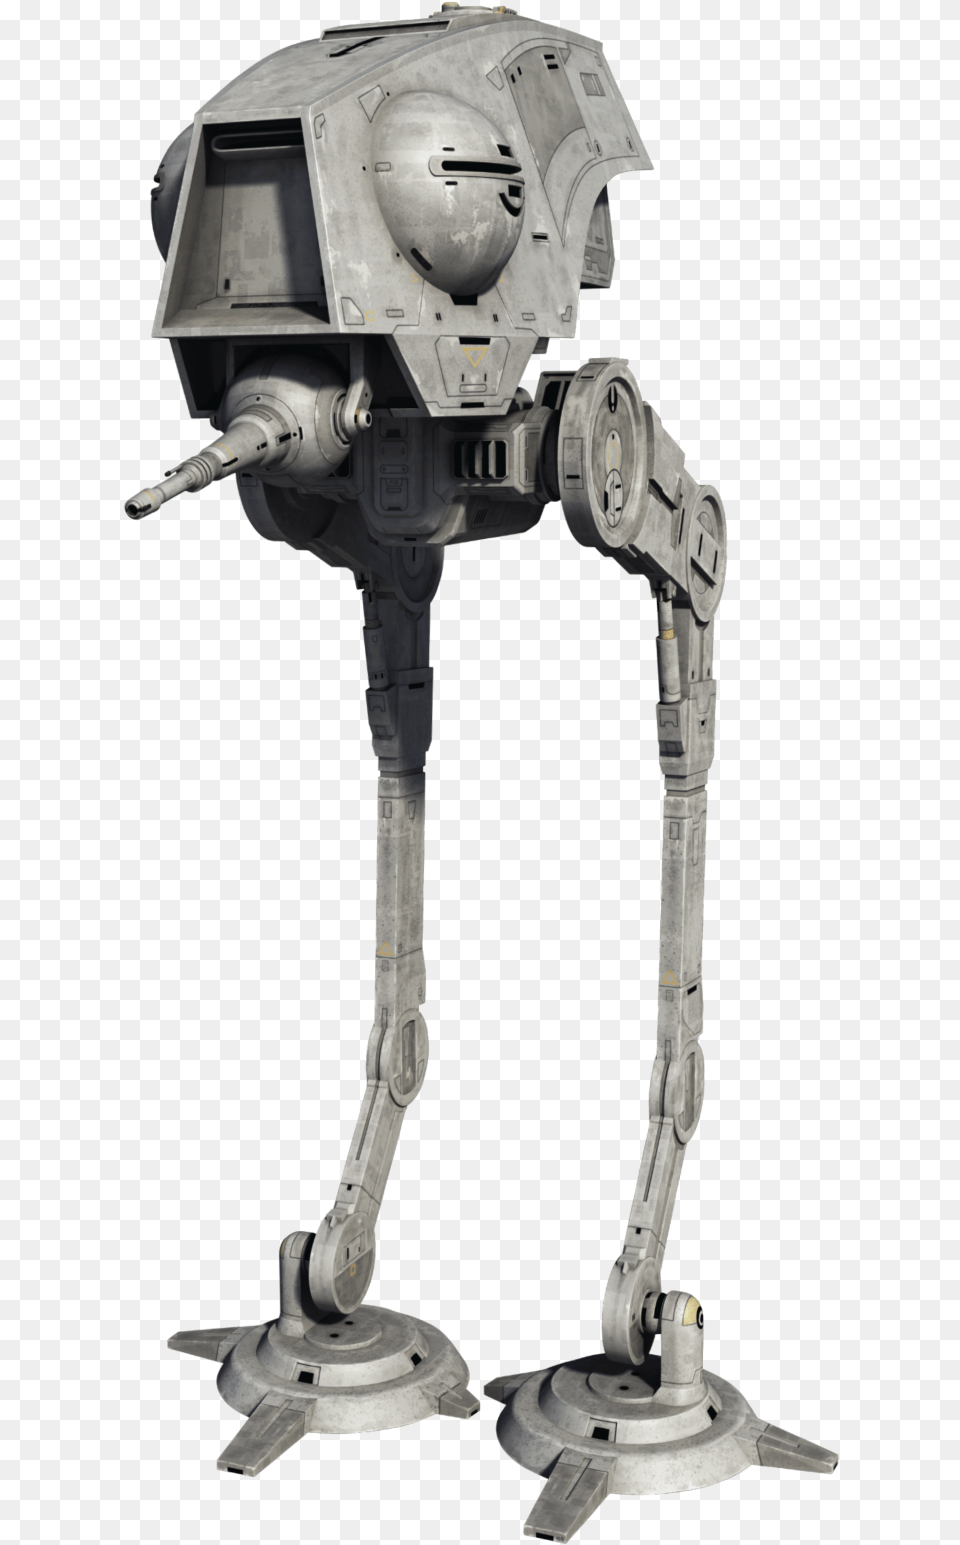 Download Hd Star Wars Atdp Star Wars, Robot, Device, Power Drill, Tool Png Image